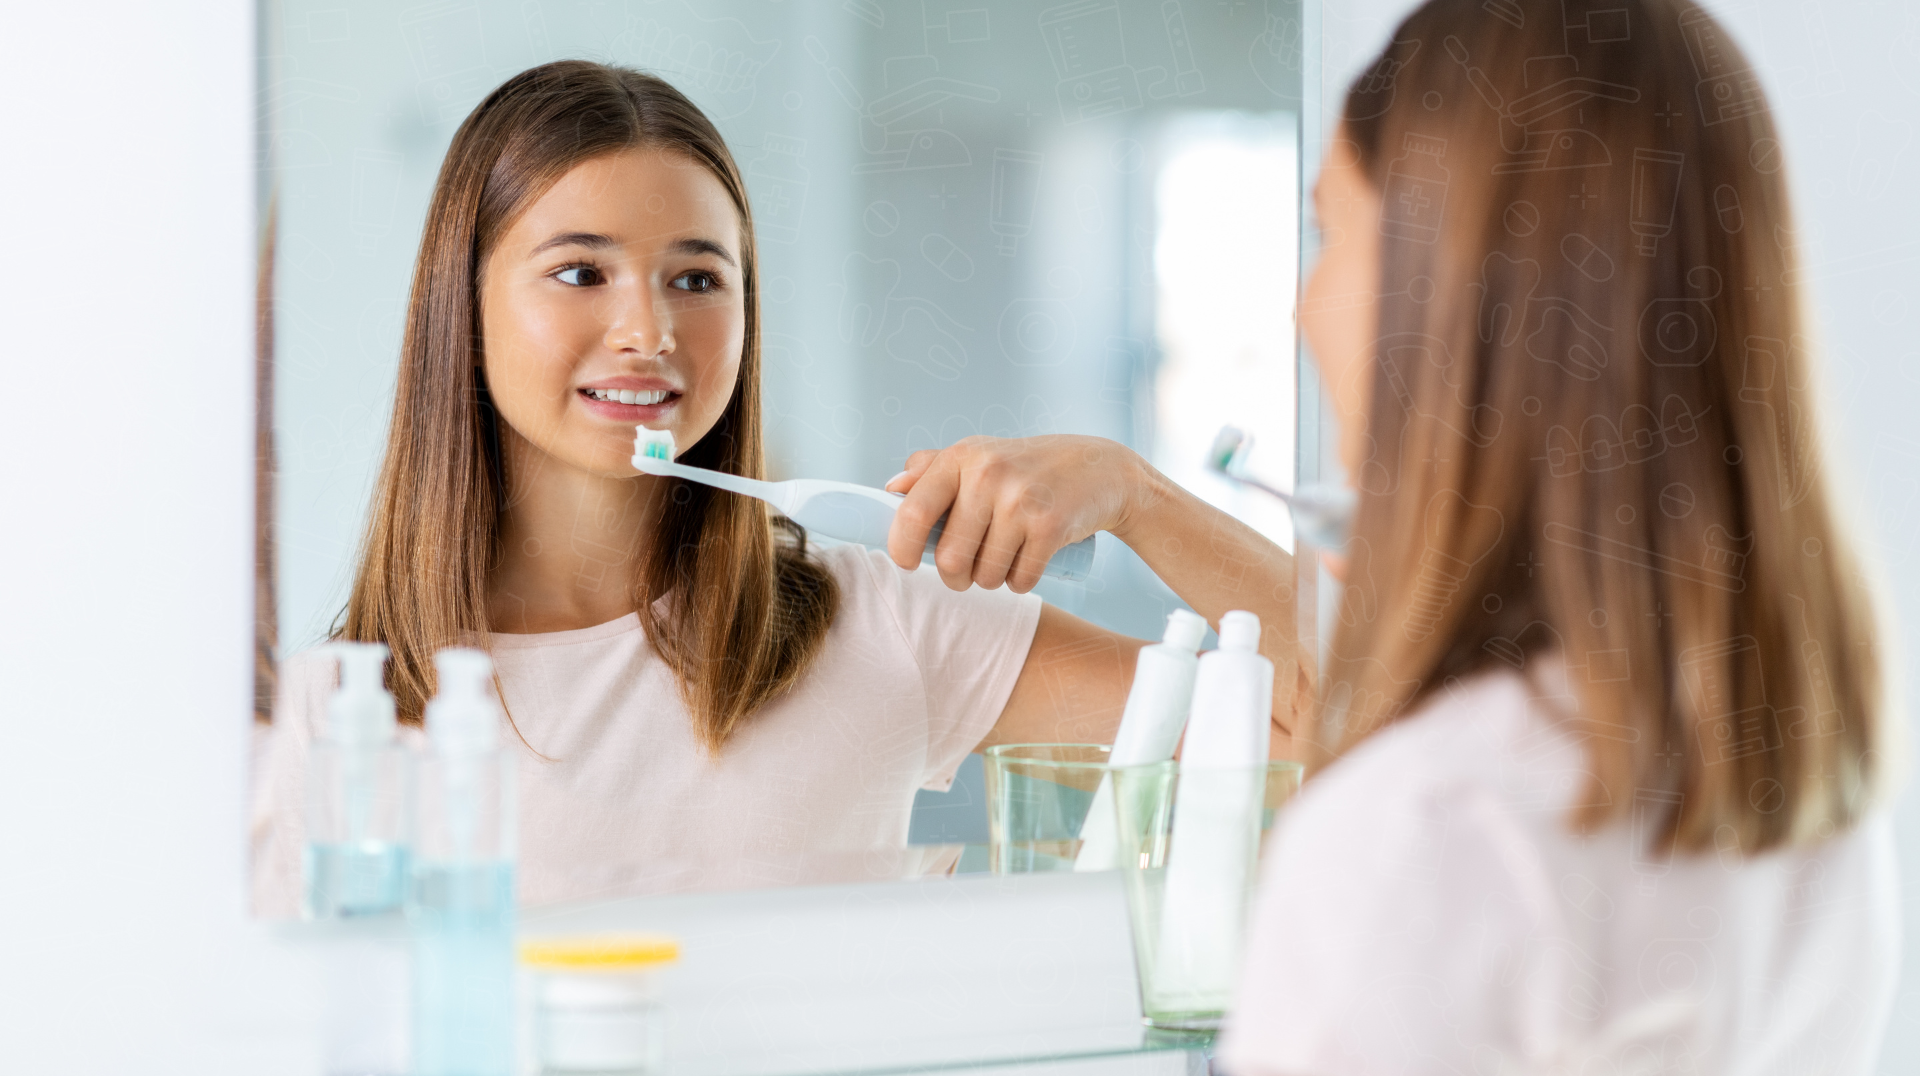 Teen Dental Health Common Issues and Prevention Strategies